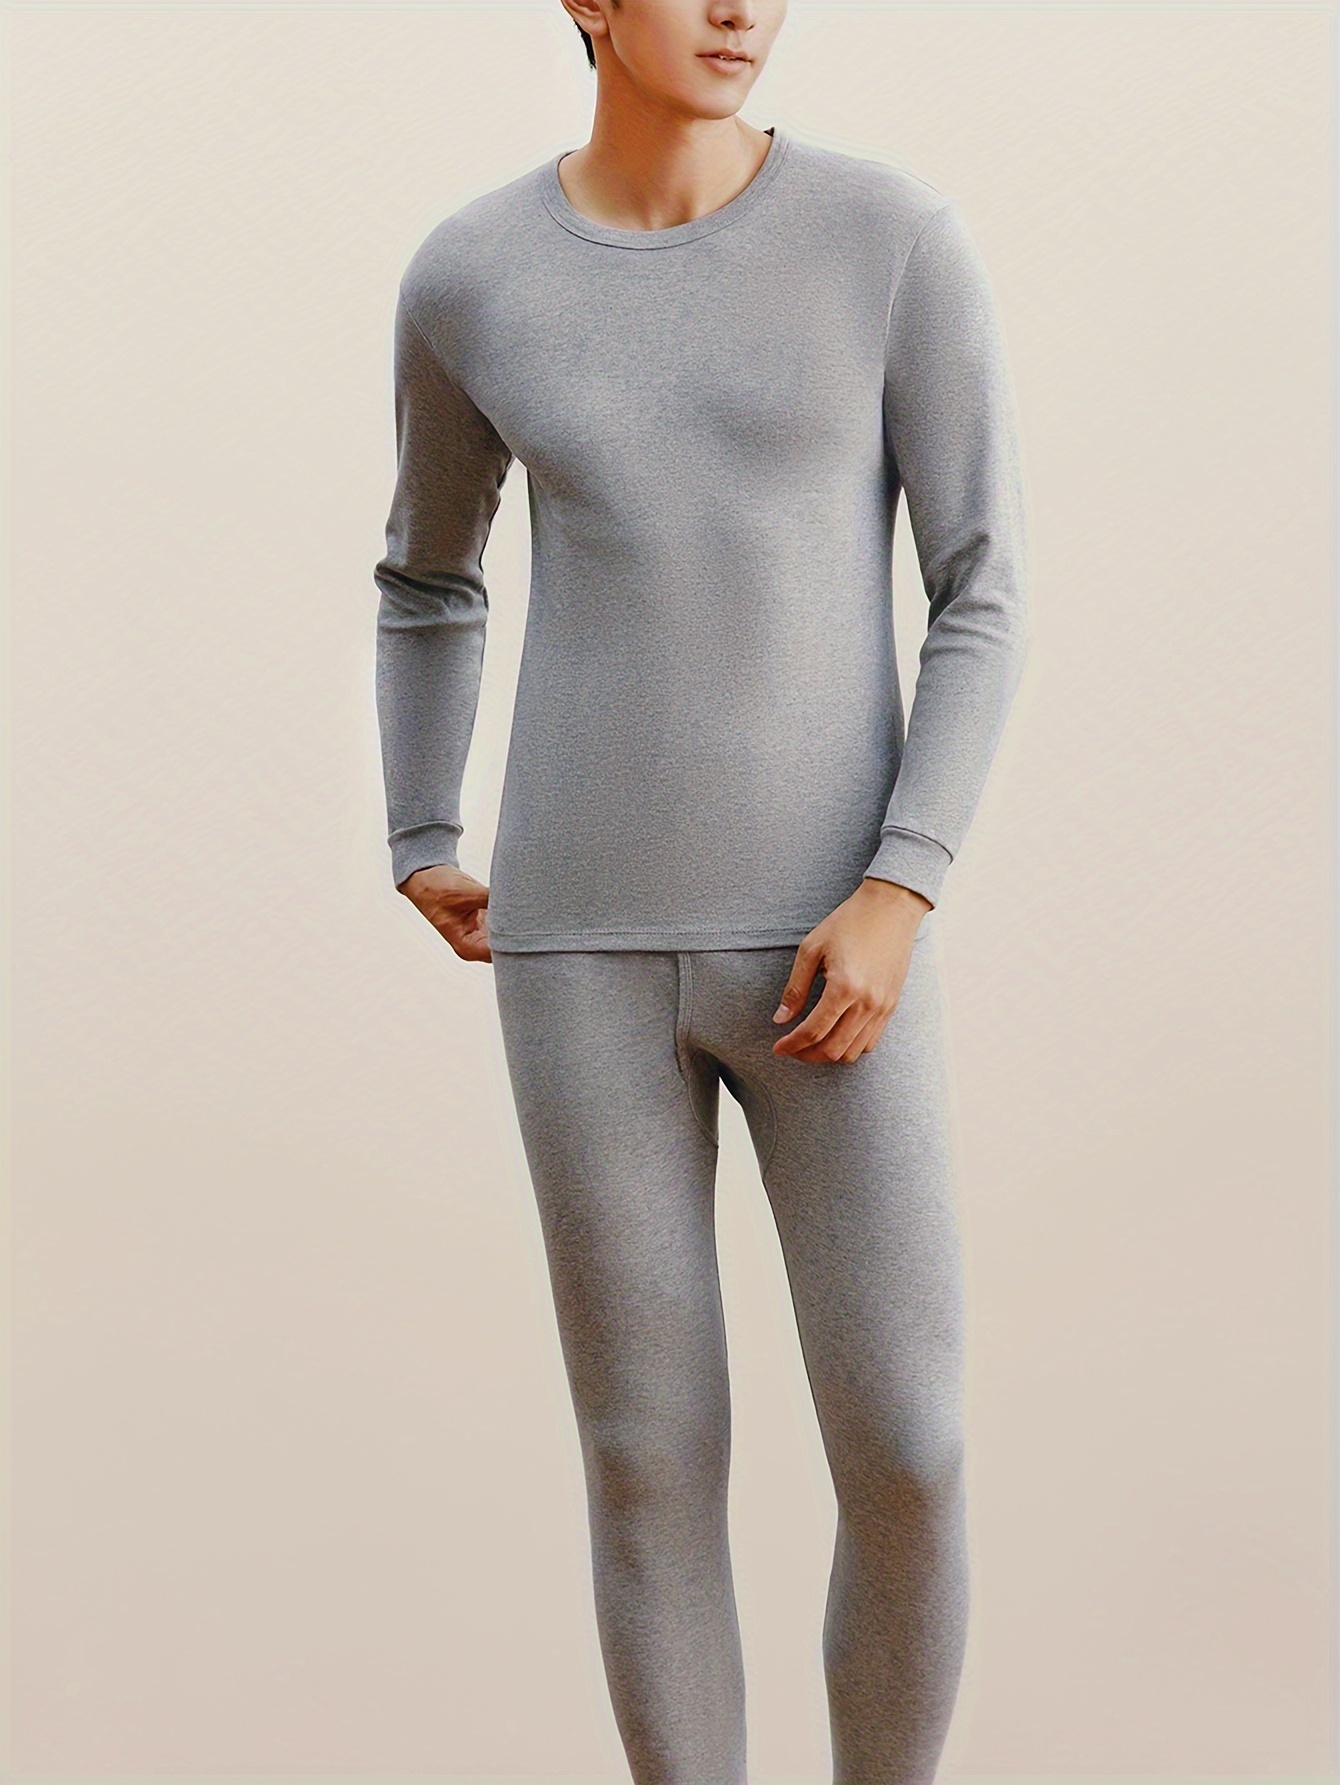 Avamo Men Base Layer Top&Bottom Set Heated Long Johns USB Electric Thermal  Underwear Rechargeable Winter Women Gray S 